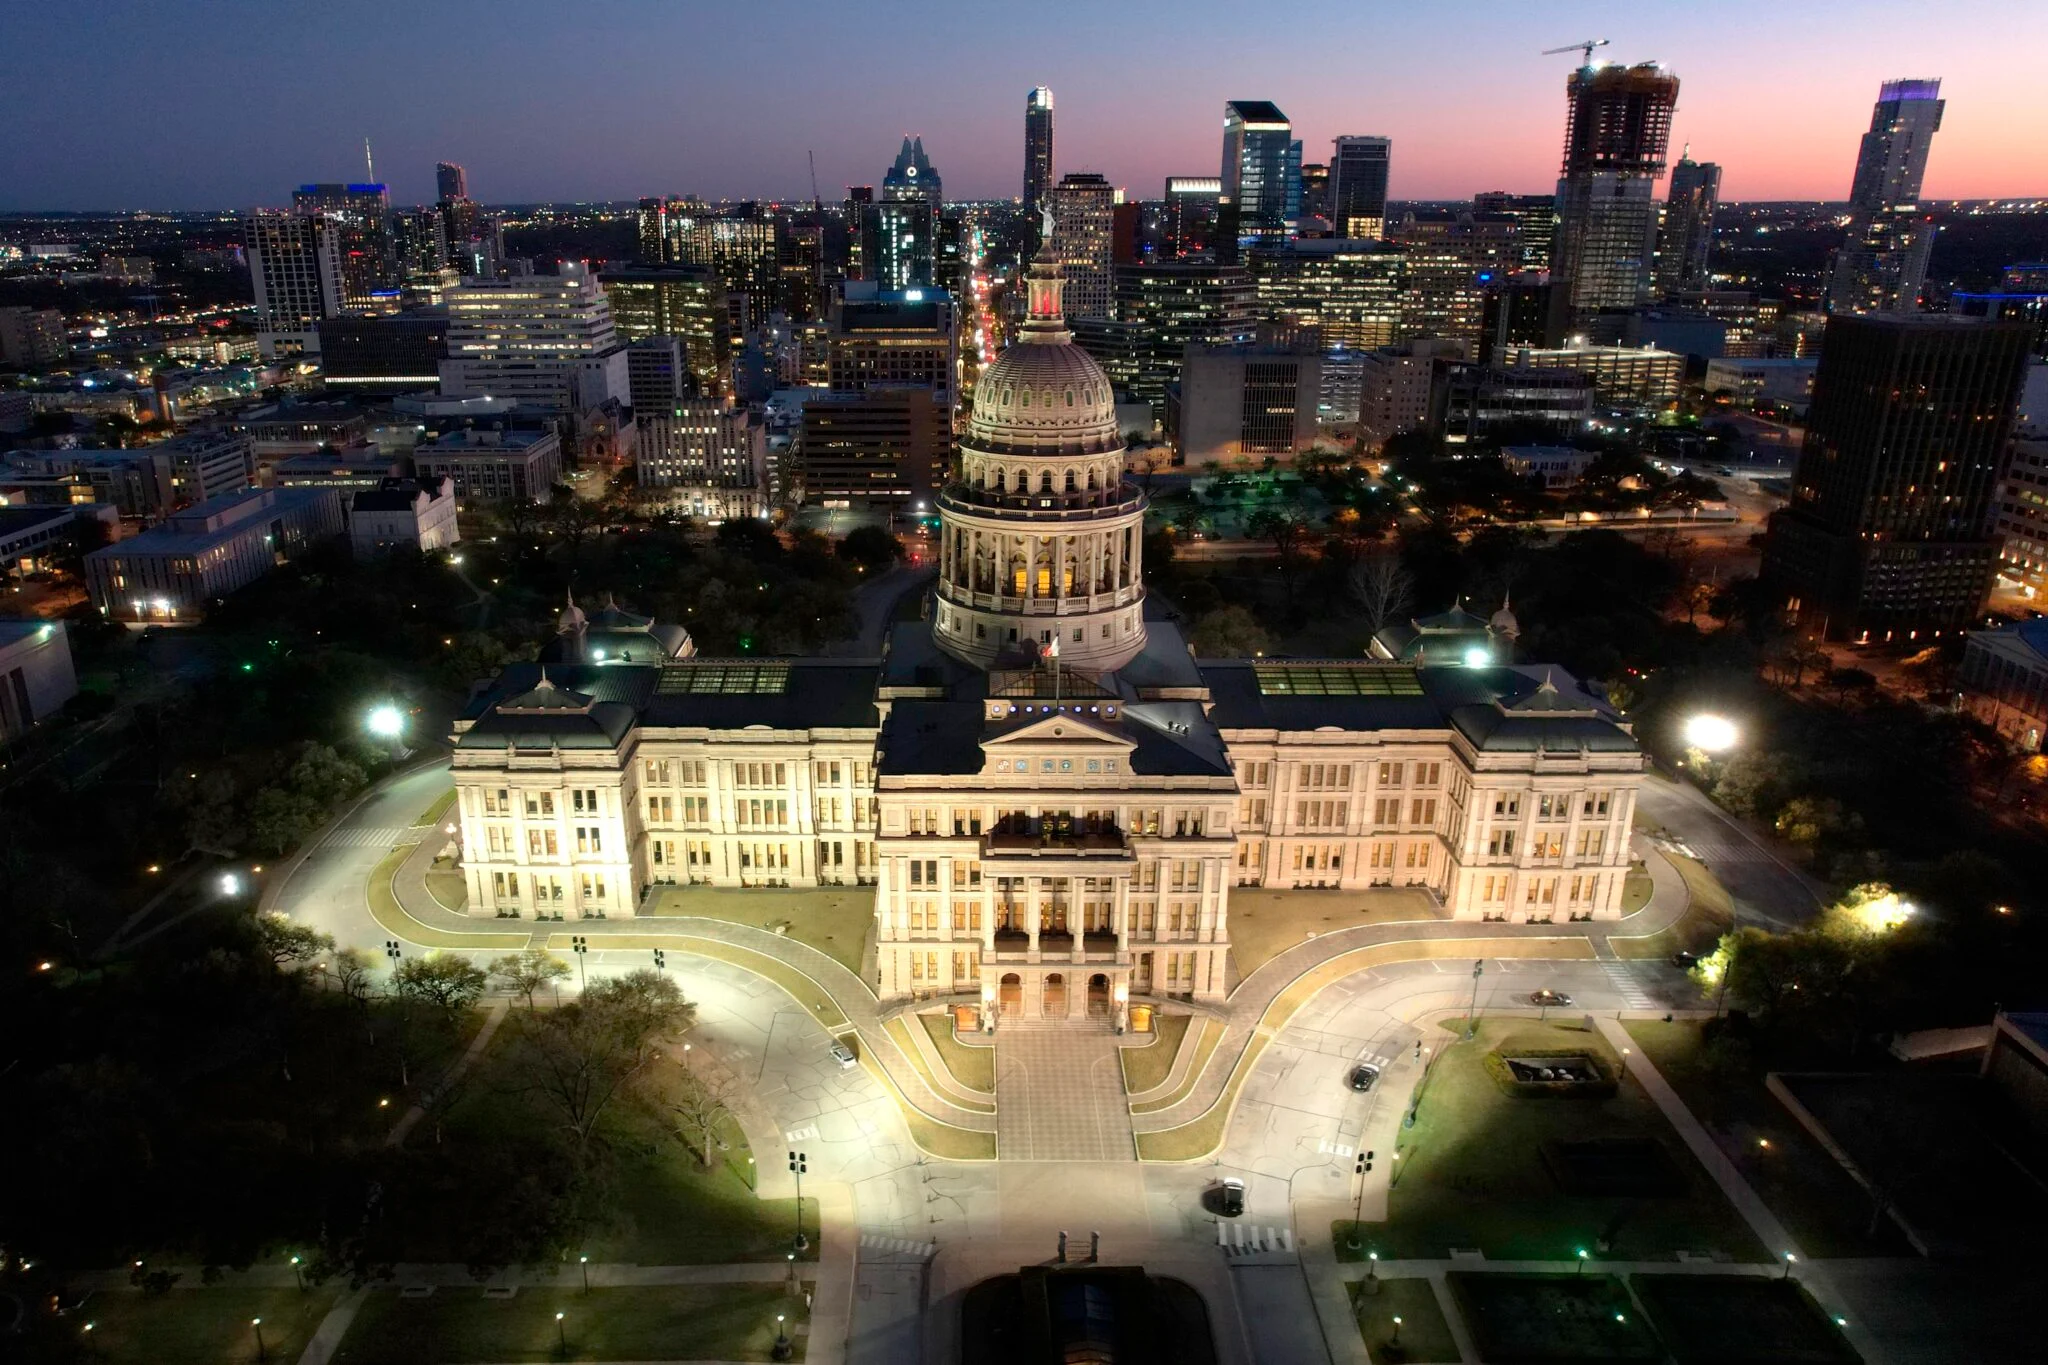 Arial view of the Texas State Capitol lit up at night.